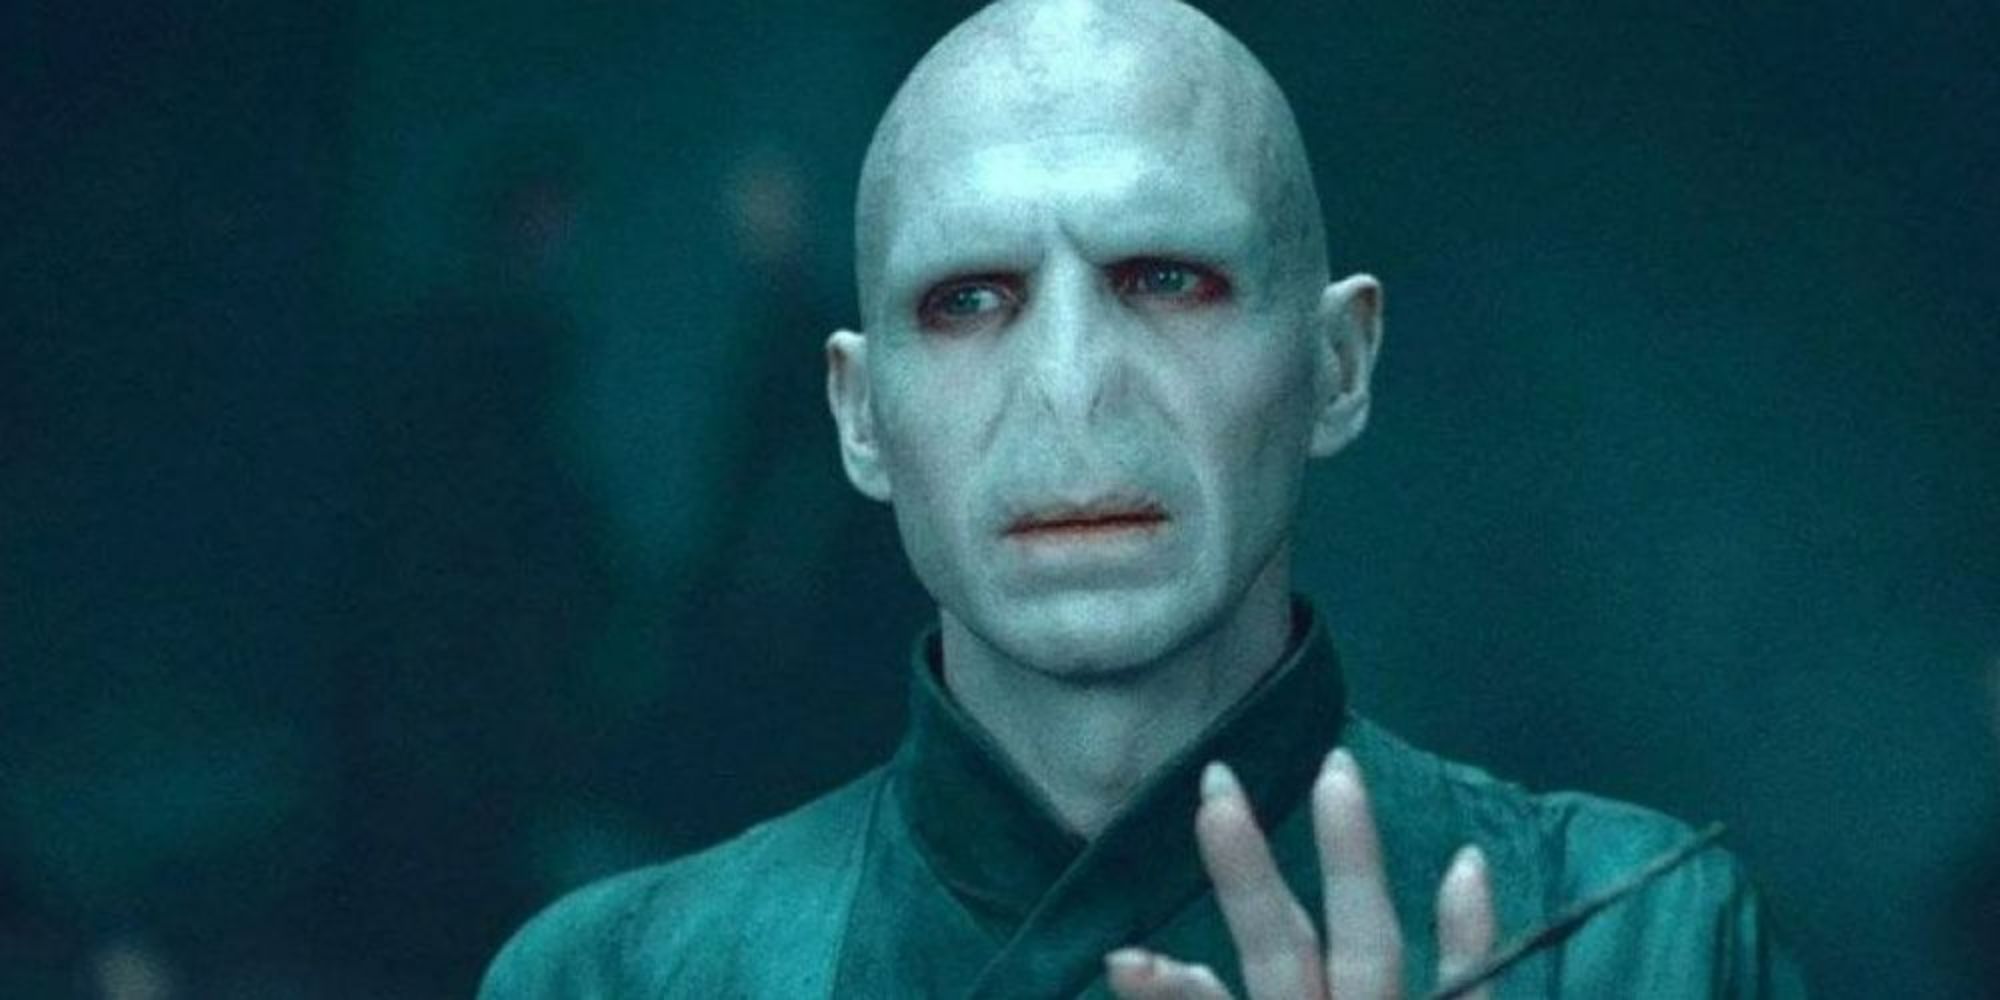 Voldemort Holding the Elder Wand and Looking Serious in Harry Potter and the Deathly Hallows: Part 2